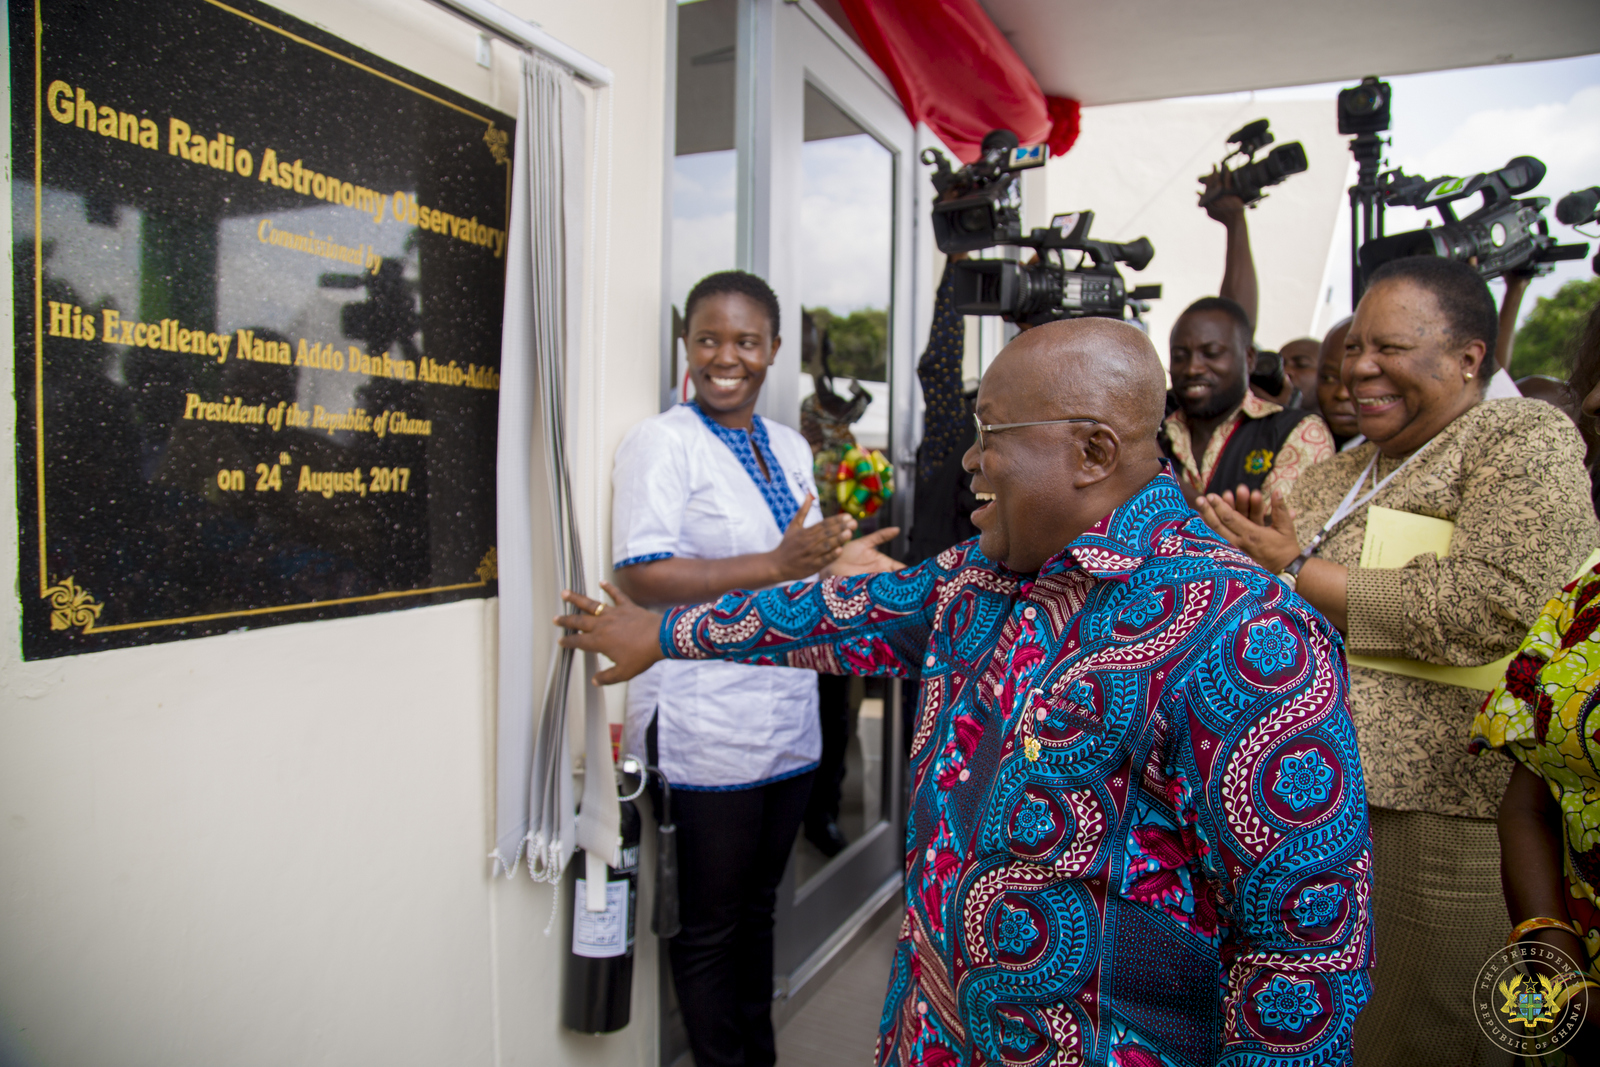 president-akufo-addo-unveiling-the-plaque-for-the-launch-of-the-ghana-radio-astronomy-observatory